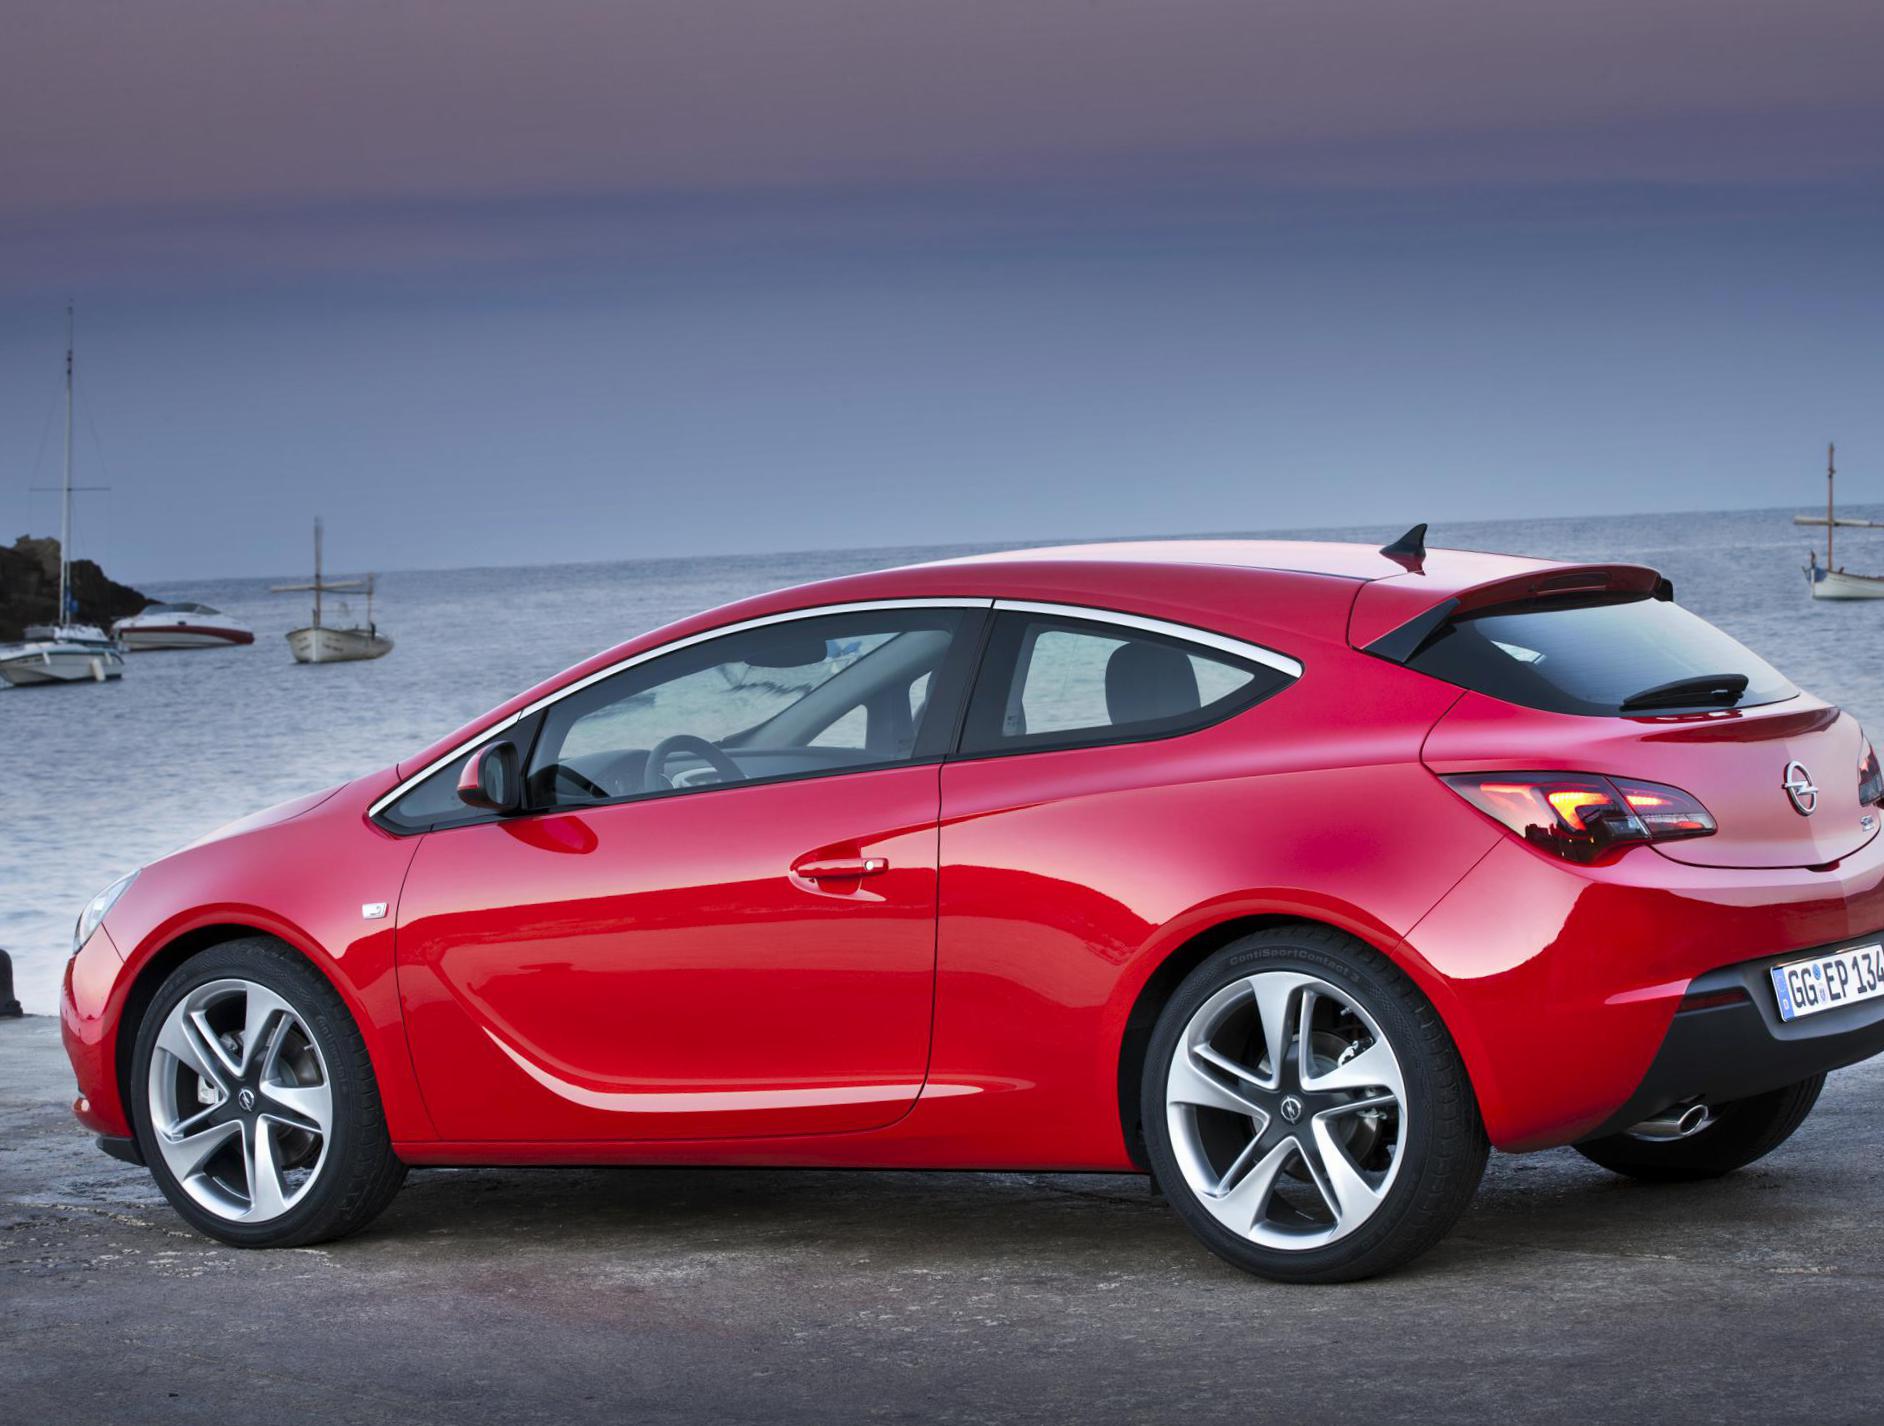 Opel Astra J GTC Photos and Specs. Photo Astra J GTC Opel reviews and